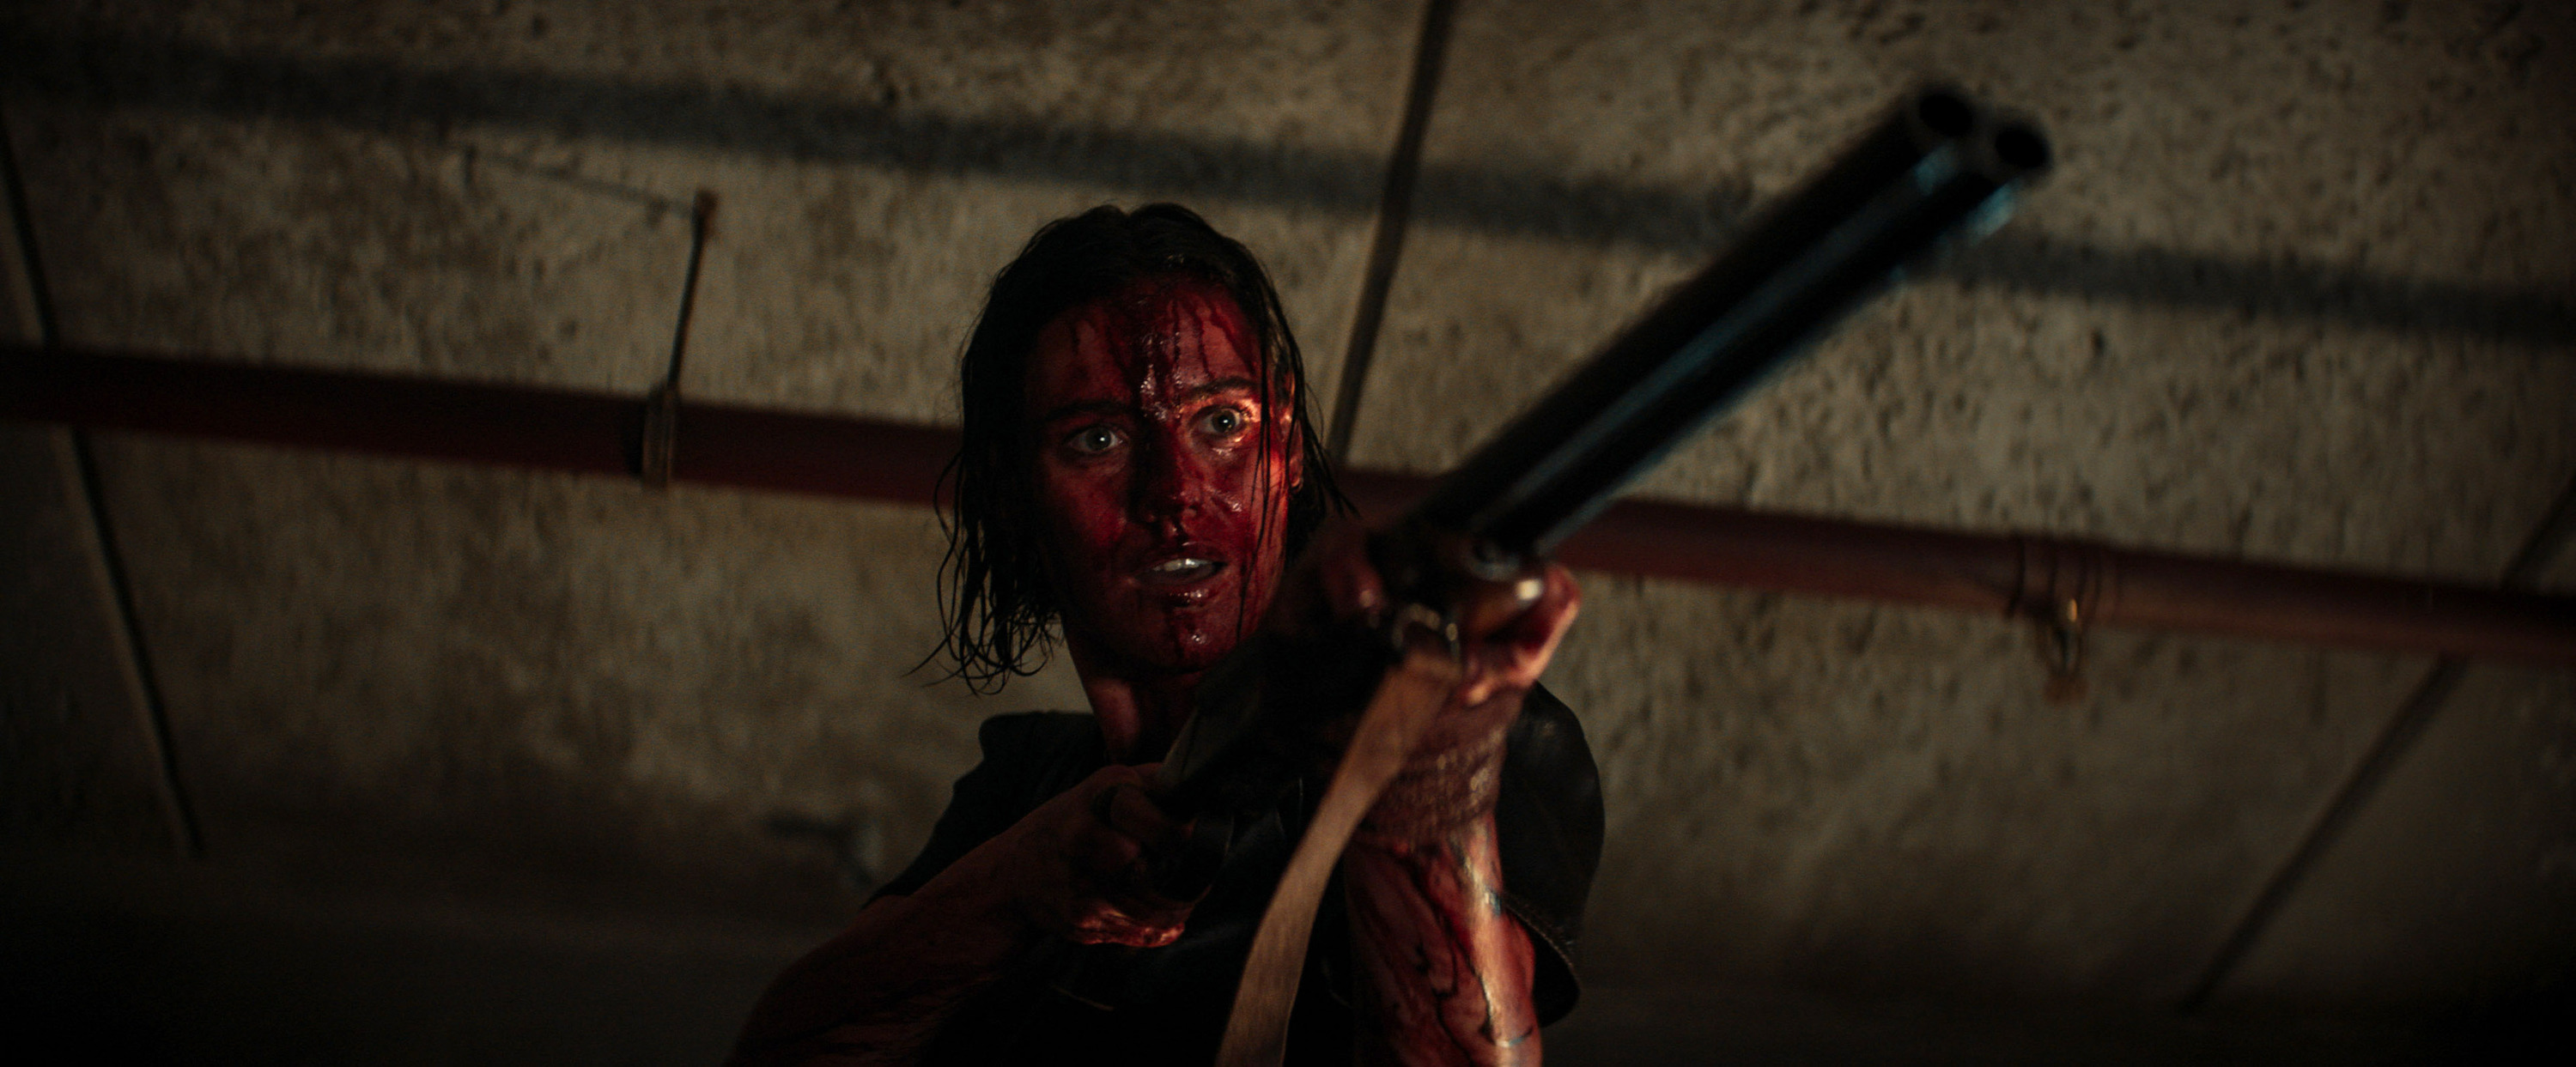 The 'Evil Dead' series: Redefining horror while setting a standard for gore